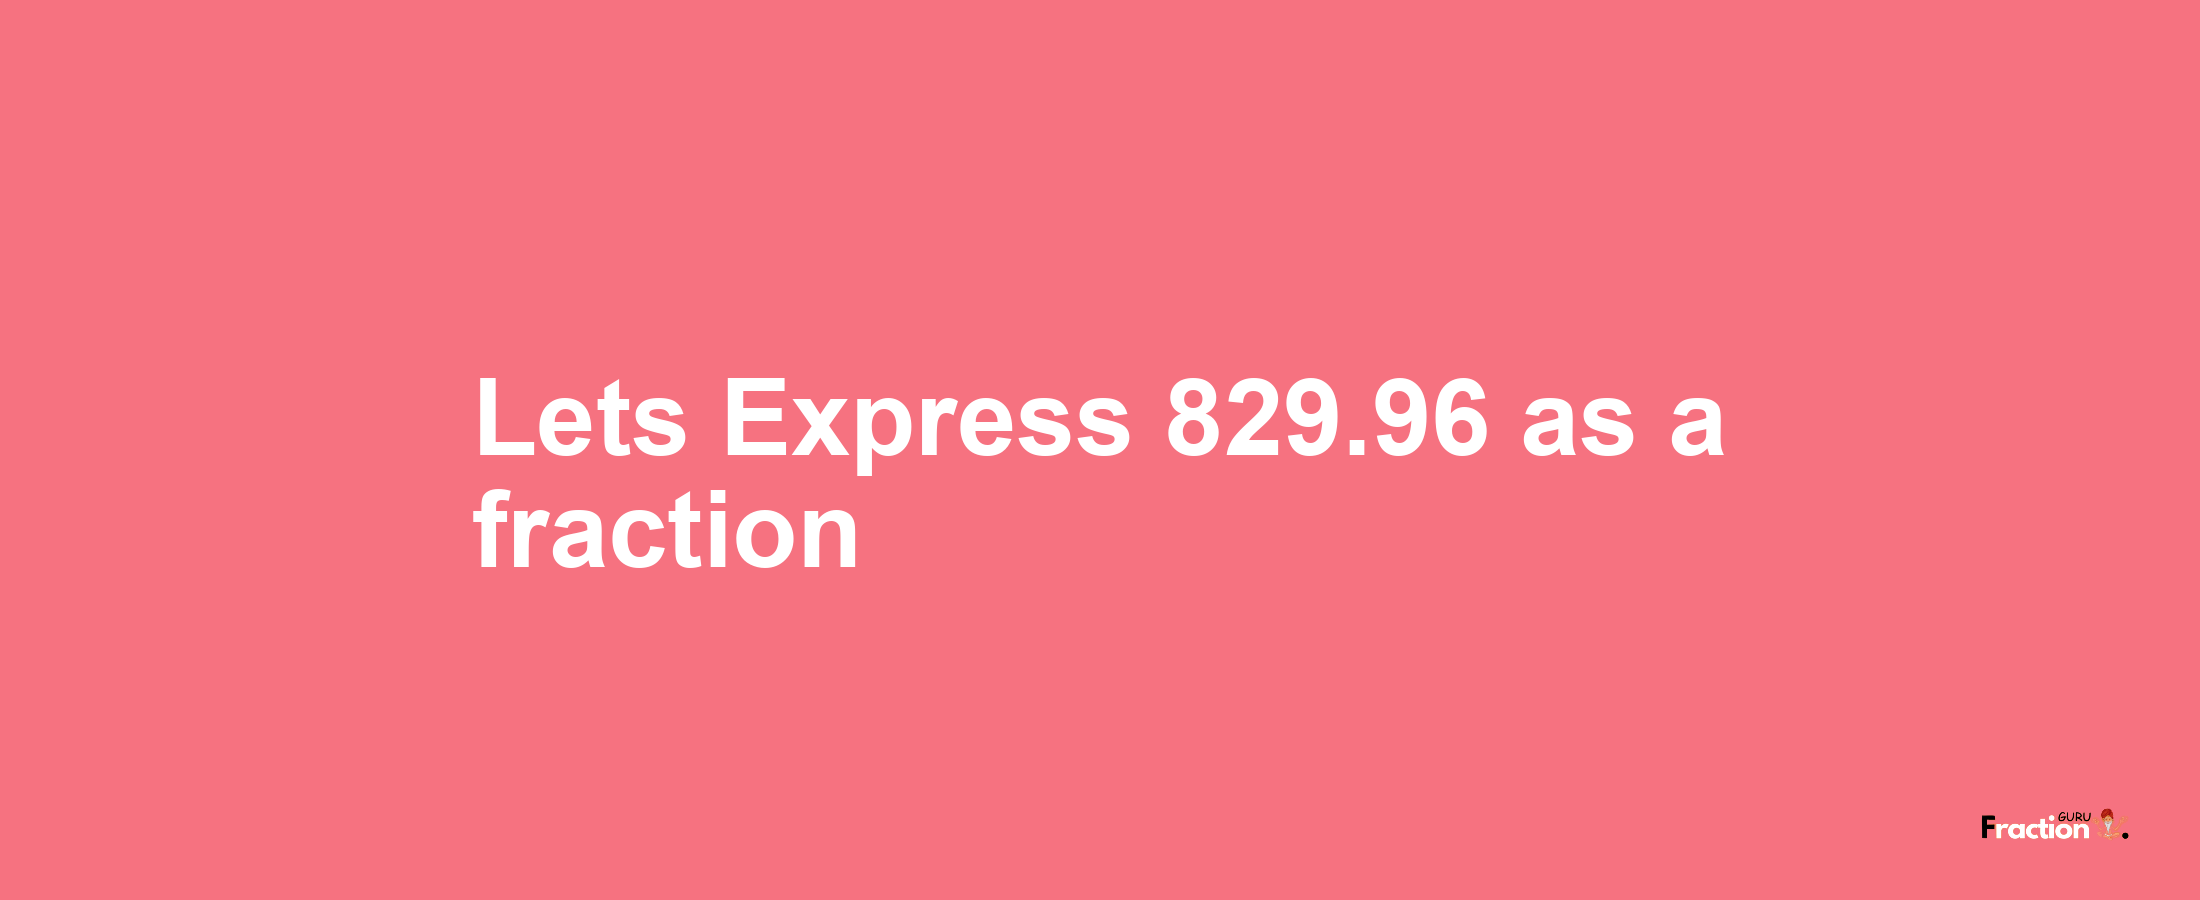 Lets Express 829.96 as afraction